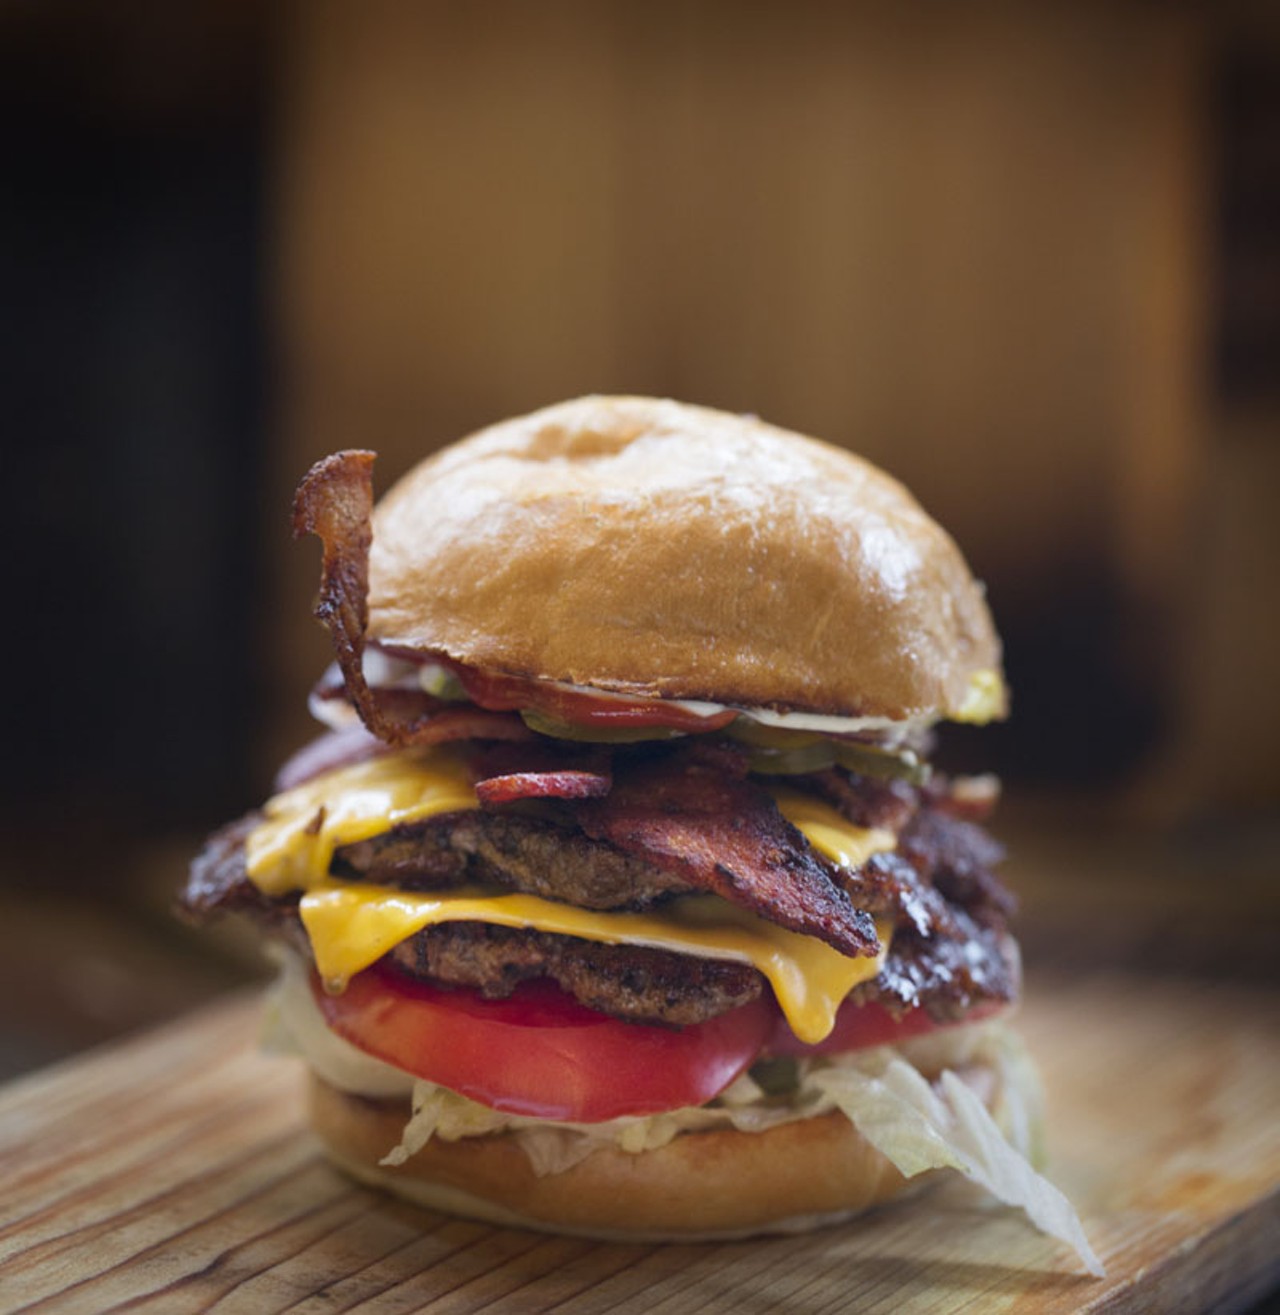 The build-your-own-burger option shown here is a double burger with cheese, bacon, pickle, onion, lettuce and tomato.